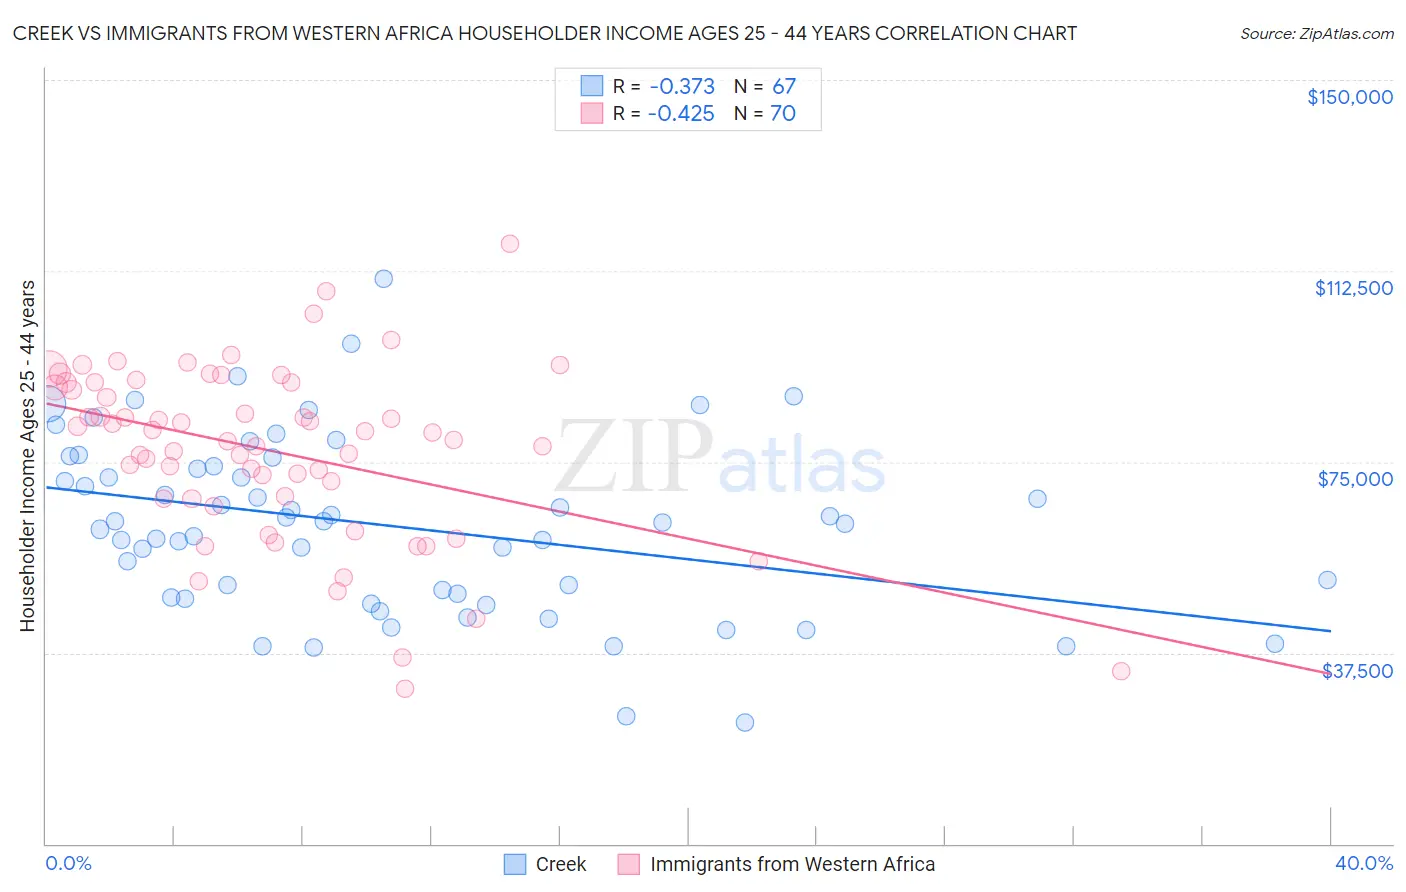 Creek vs Immigrants from Western Africa Householder Income Ages 25 - 44 years